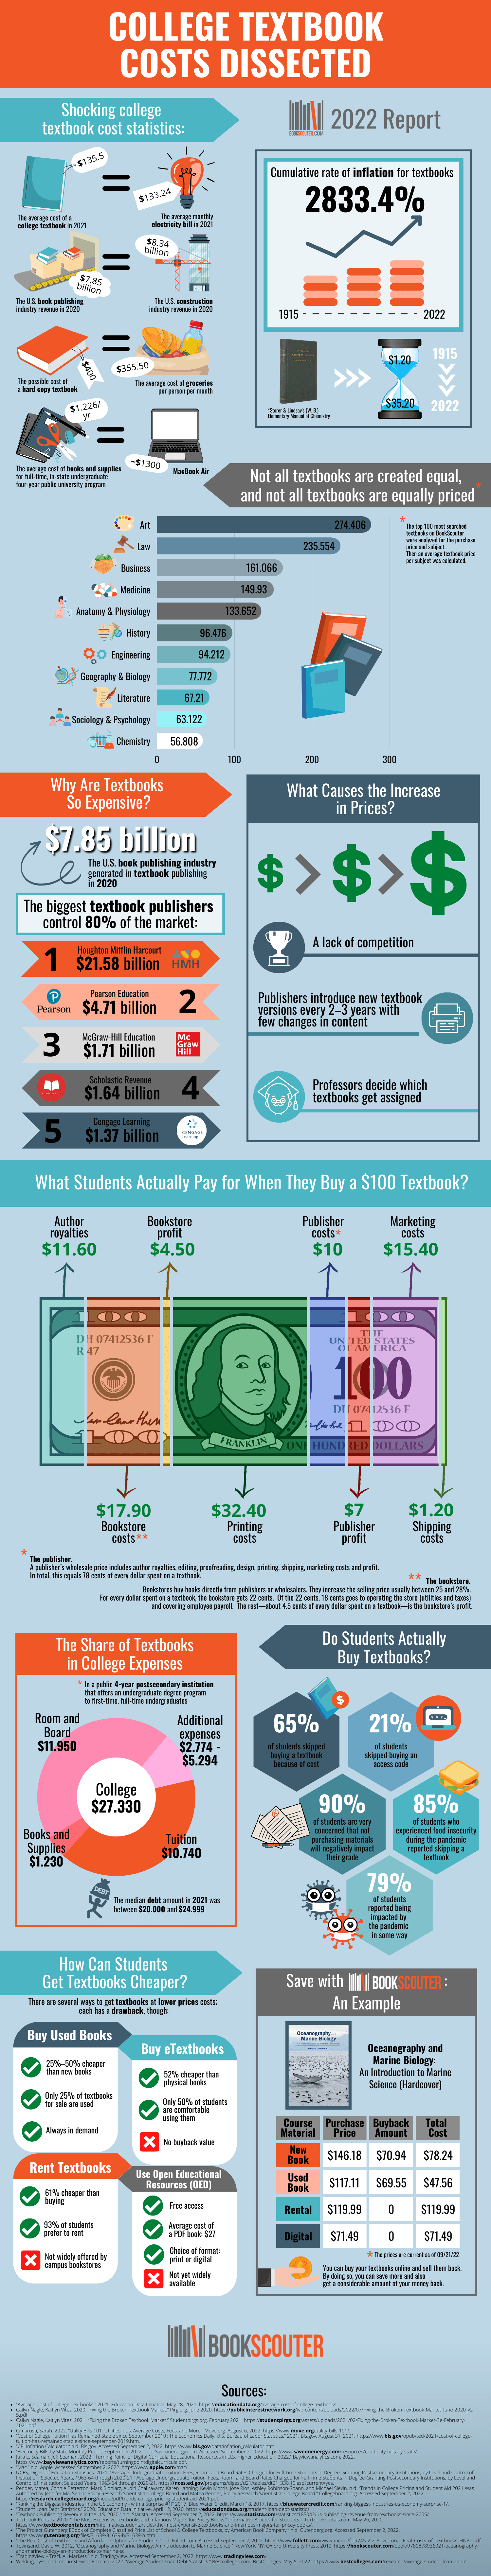 Average Cost of College Textbooks Infographics 2022